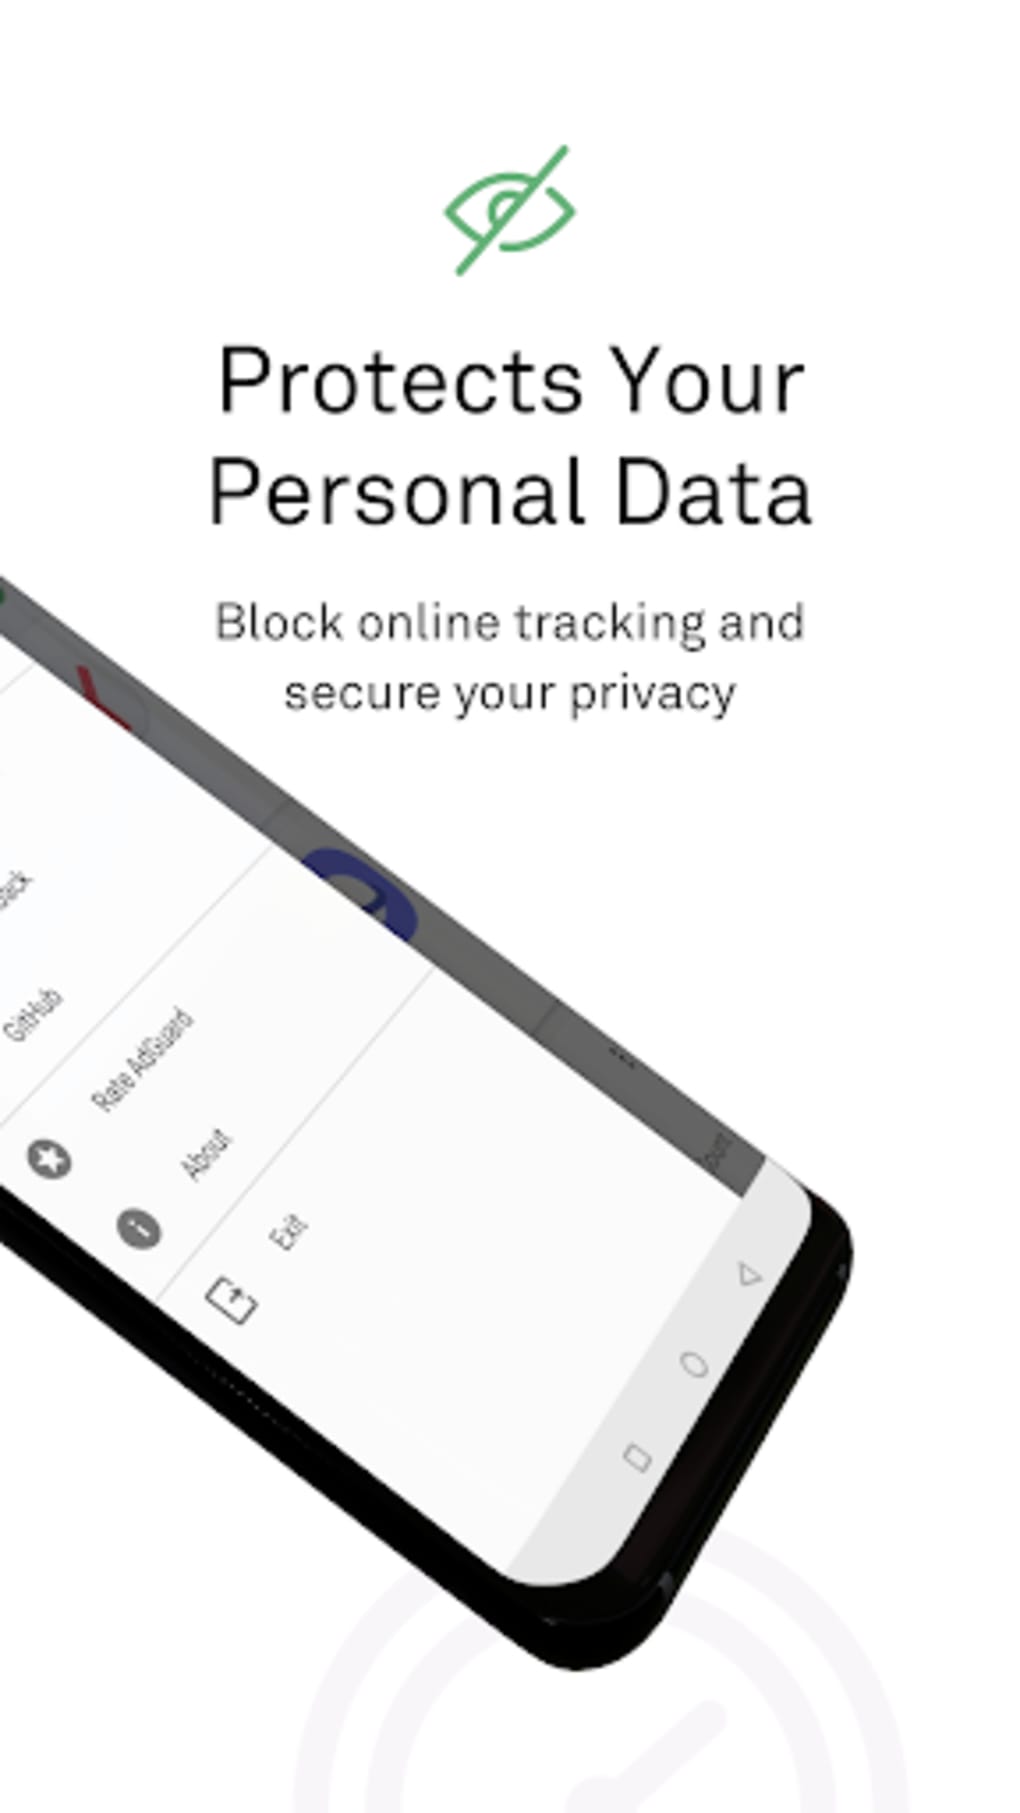 adguard download android similar